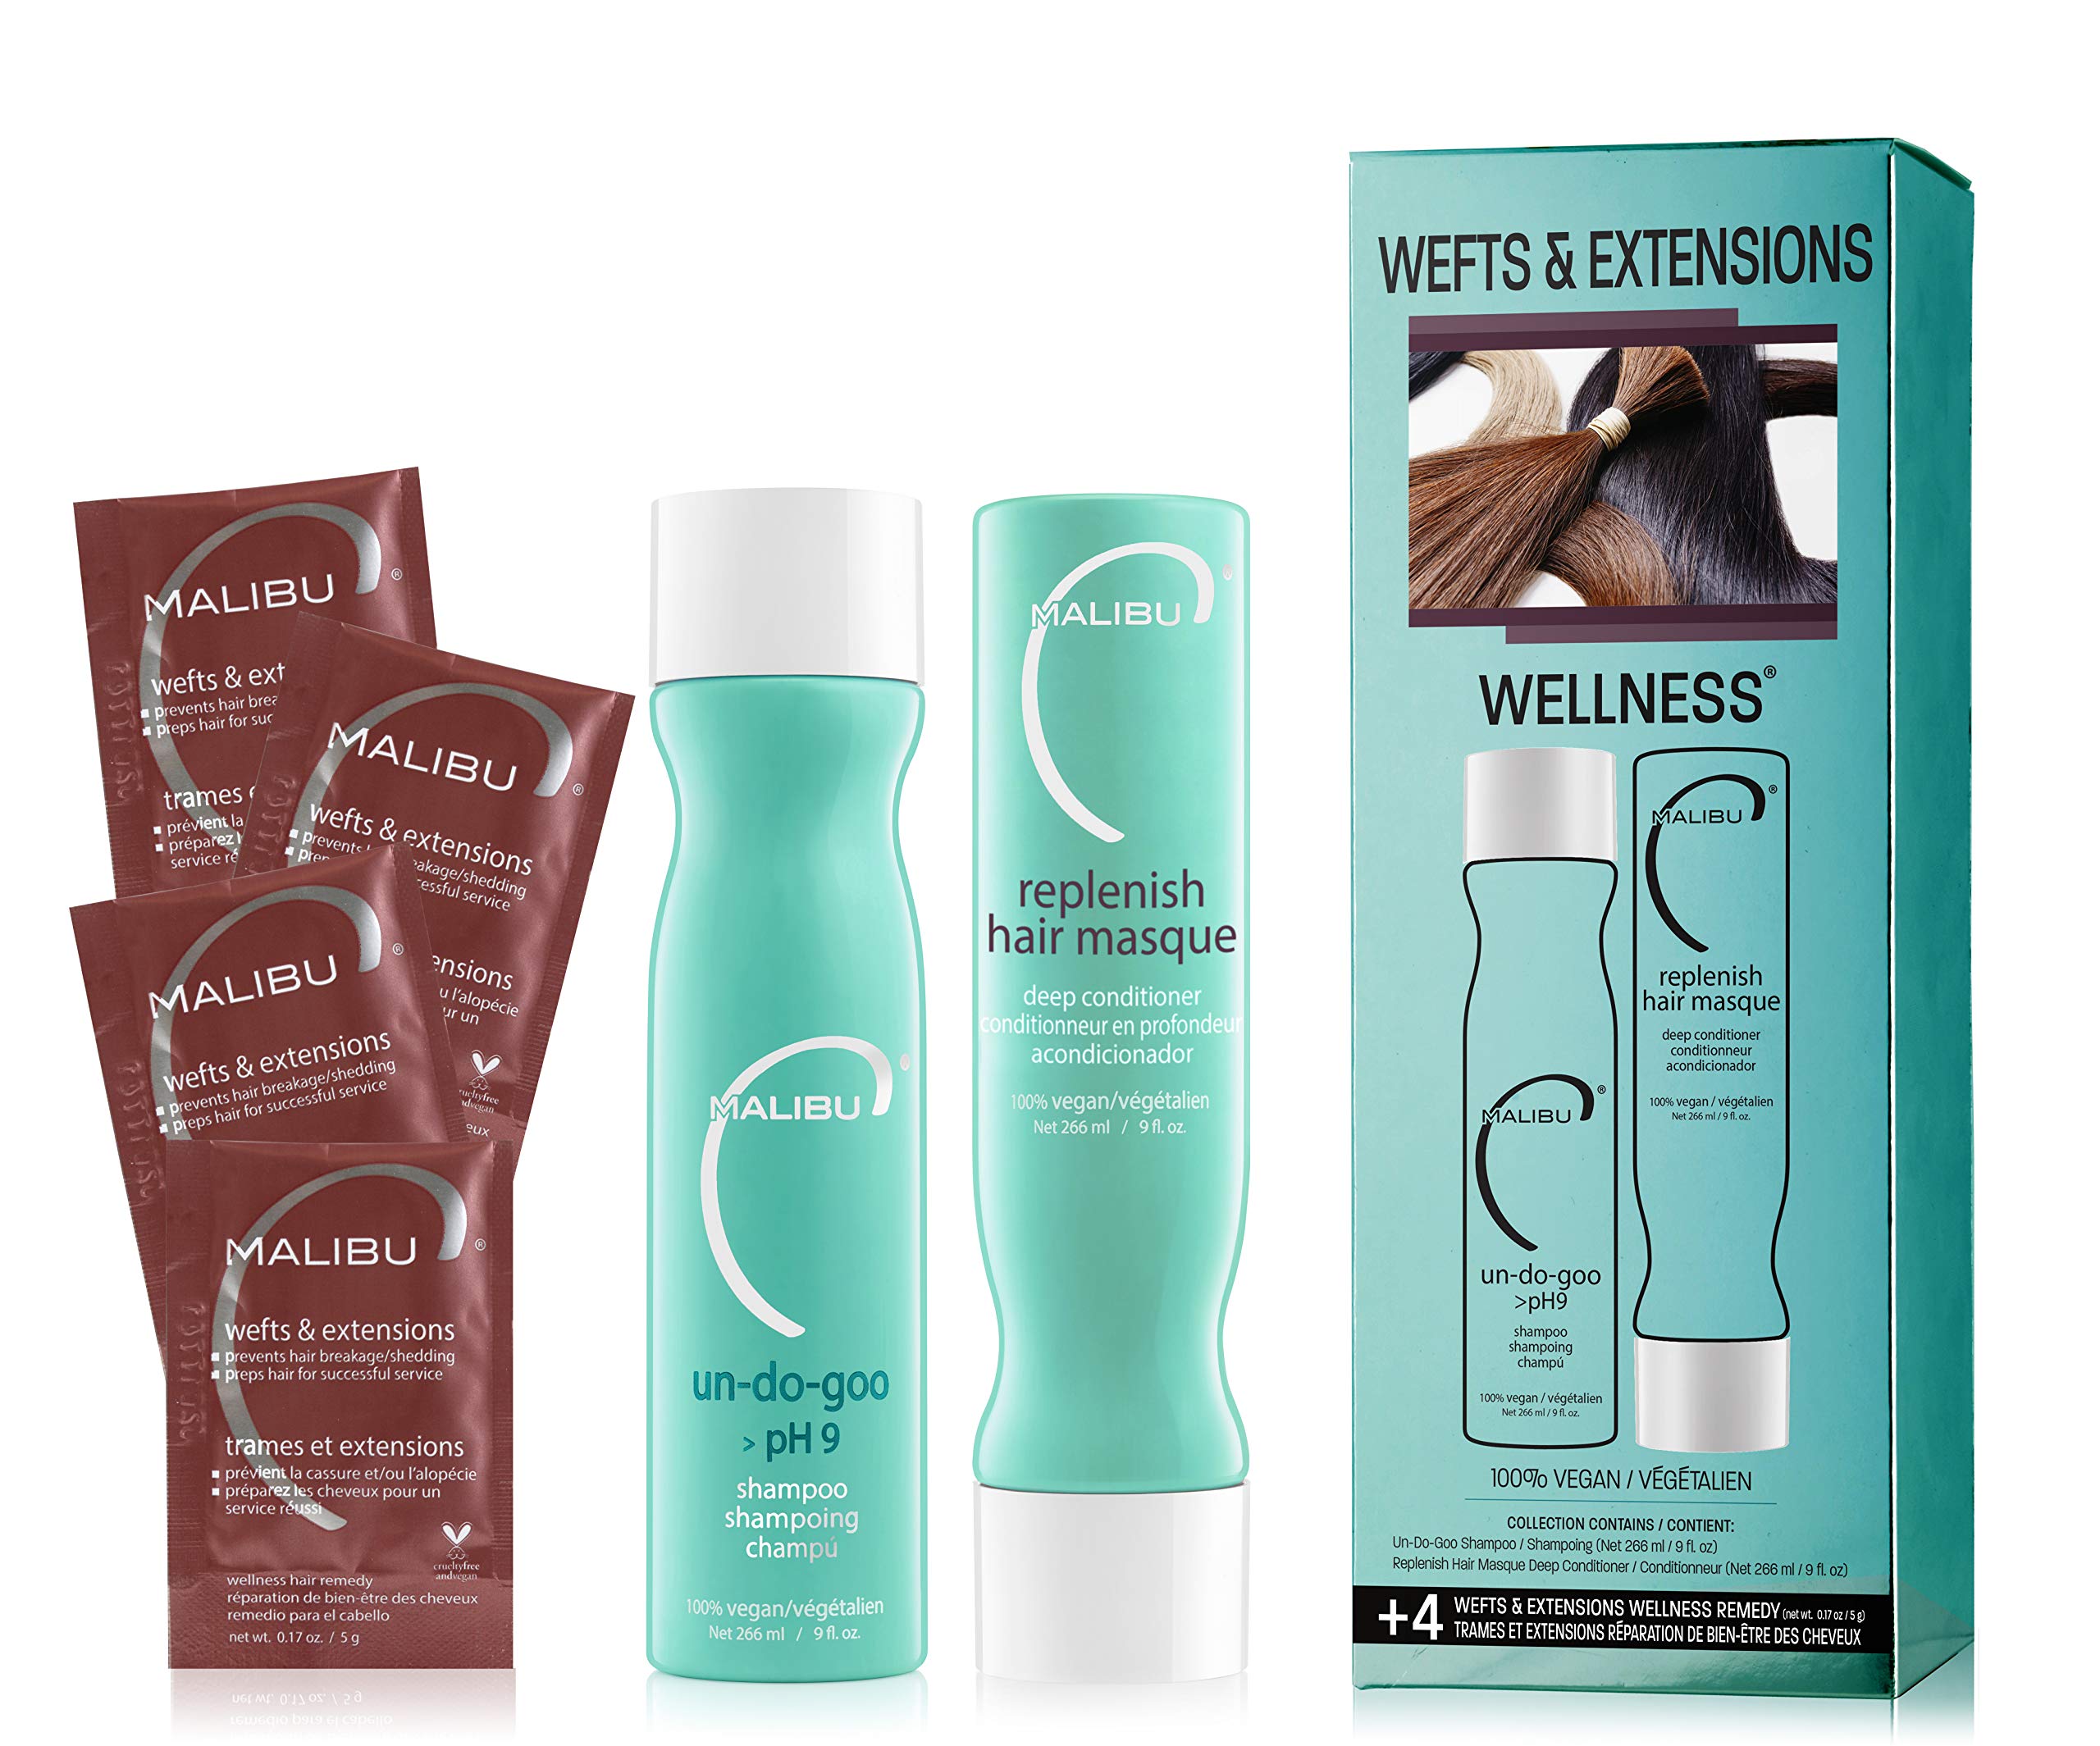 Malibu C Wefts & Extensions Wellness Hair Collection - Hair Care for Extensions & Wefts Maintenance - Reduces Hair Breakage for